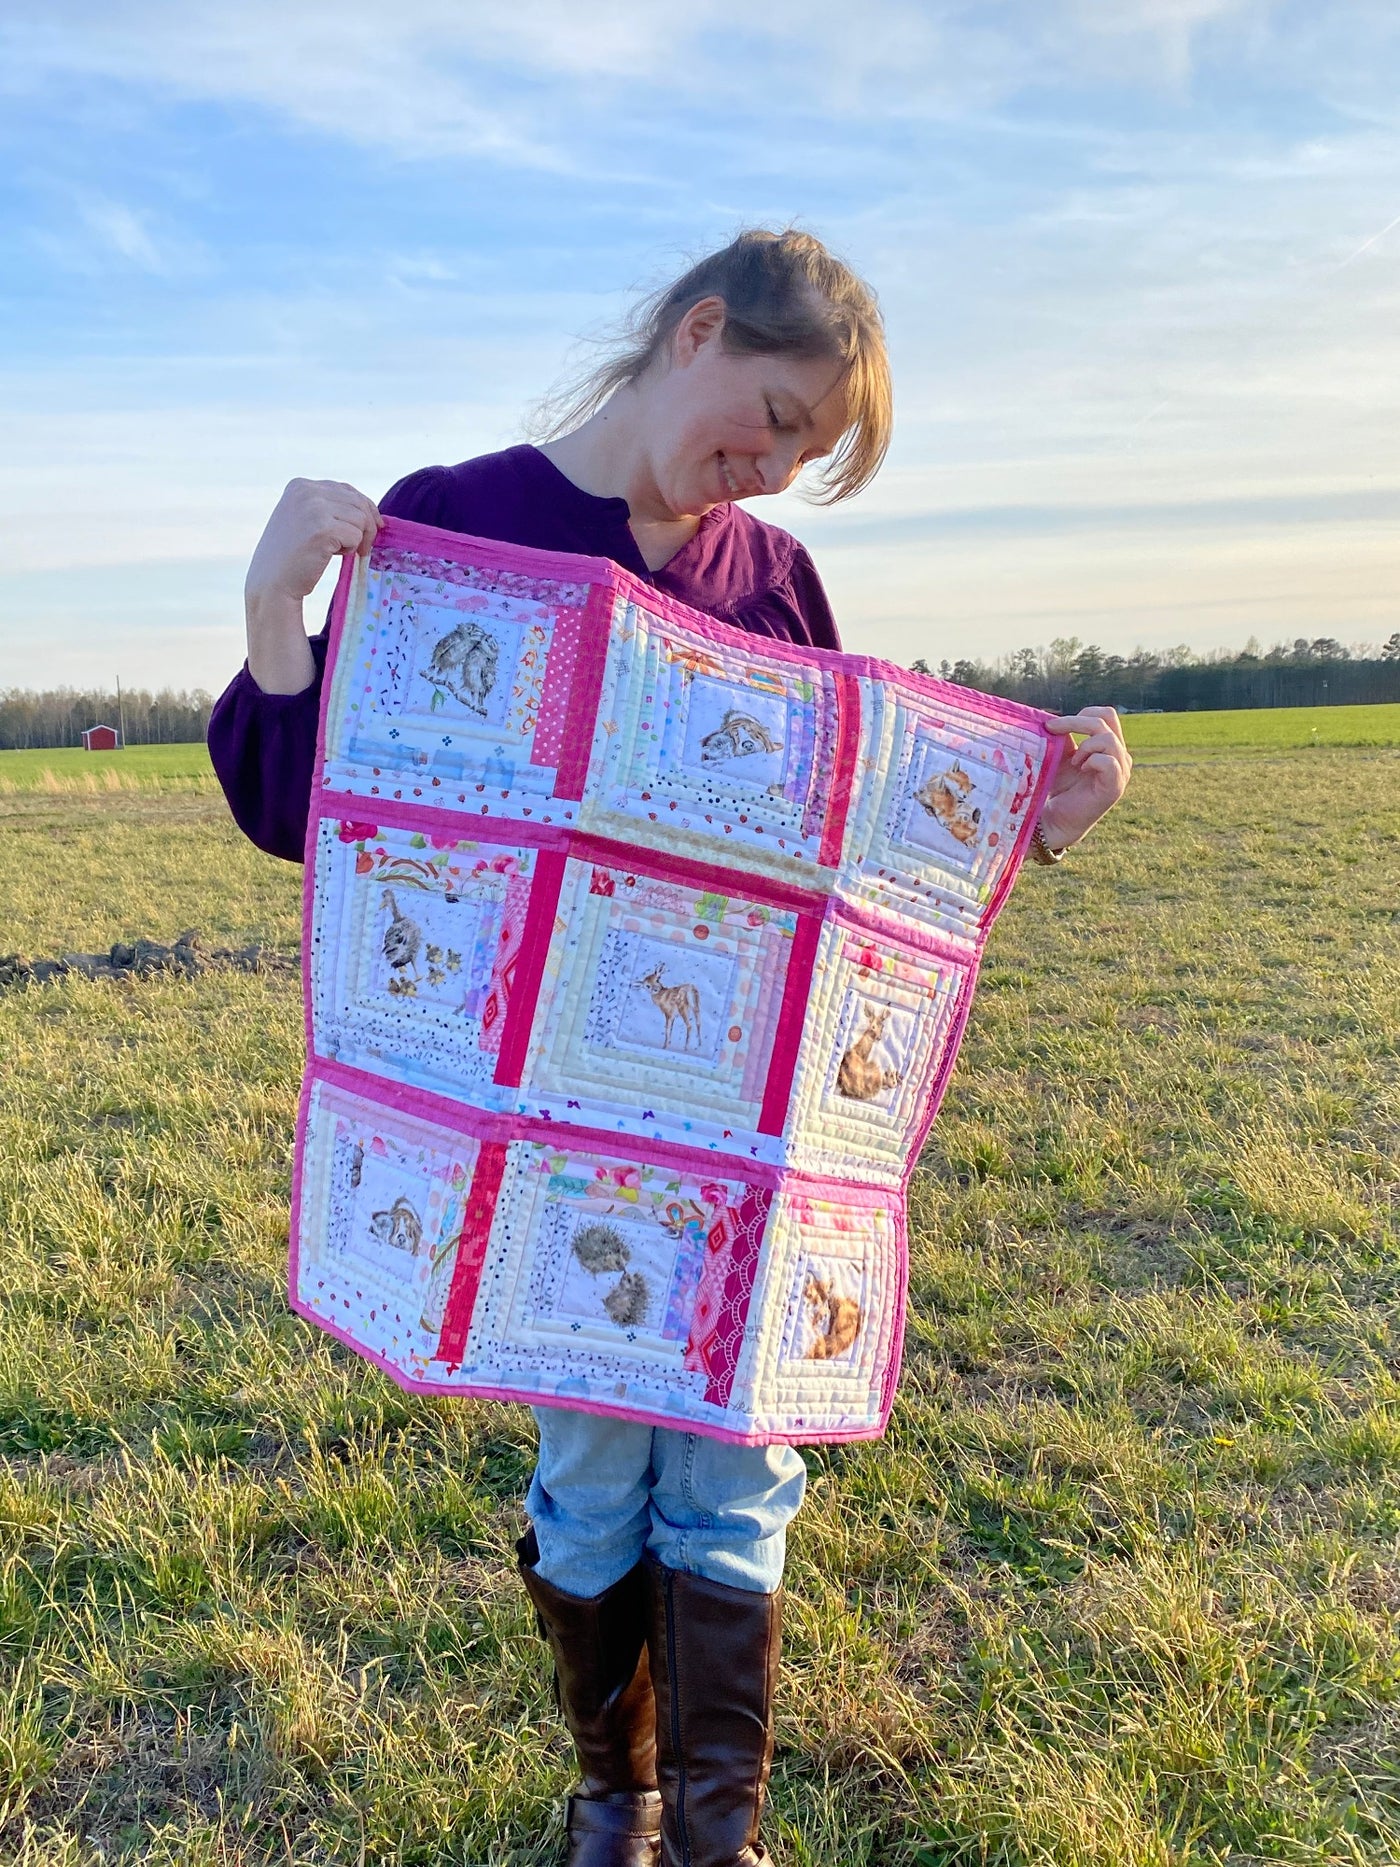 A scrappy or multiple fabrics in pink and white colors  with baby animal print centers. It is a handmade, patchwork, log cabin style crib or baby quilt